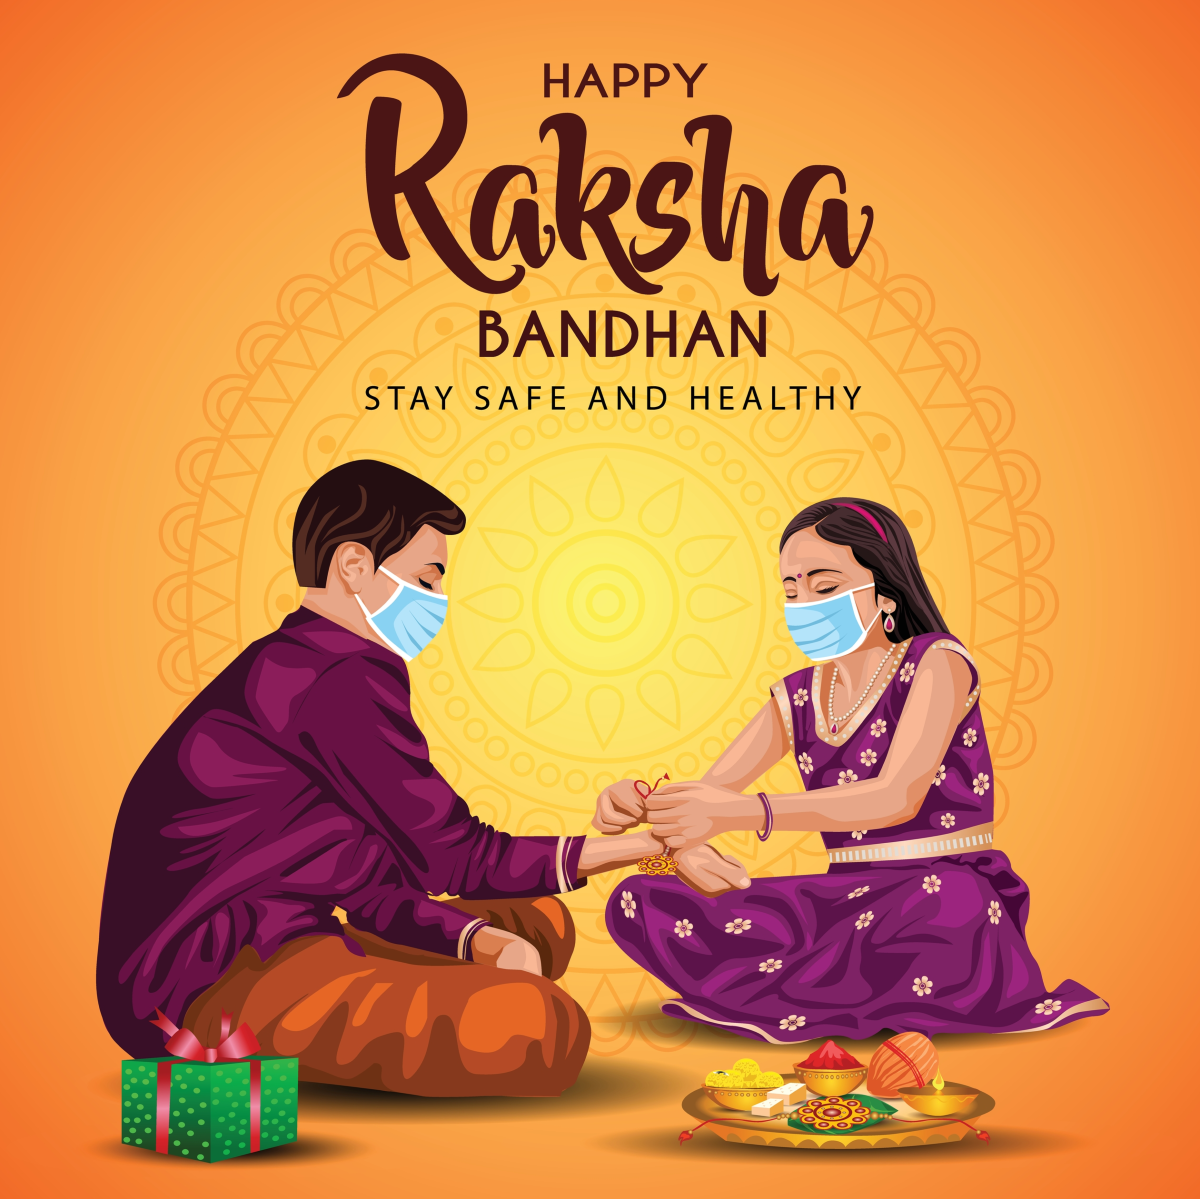 Happy Raksha Bandhan 2021 Images, Wishes, Quotes, Messages and